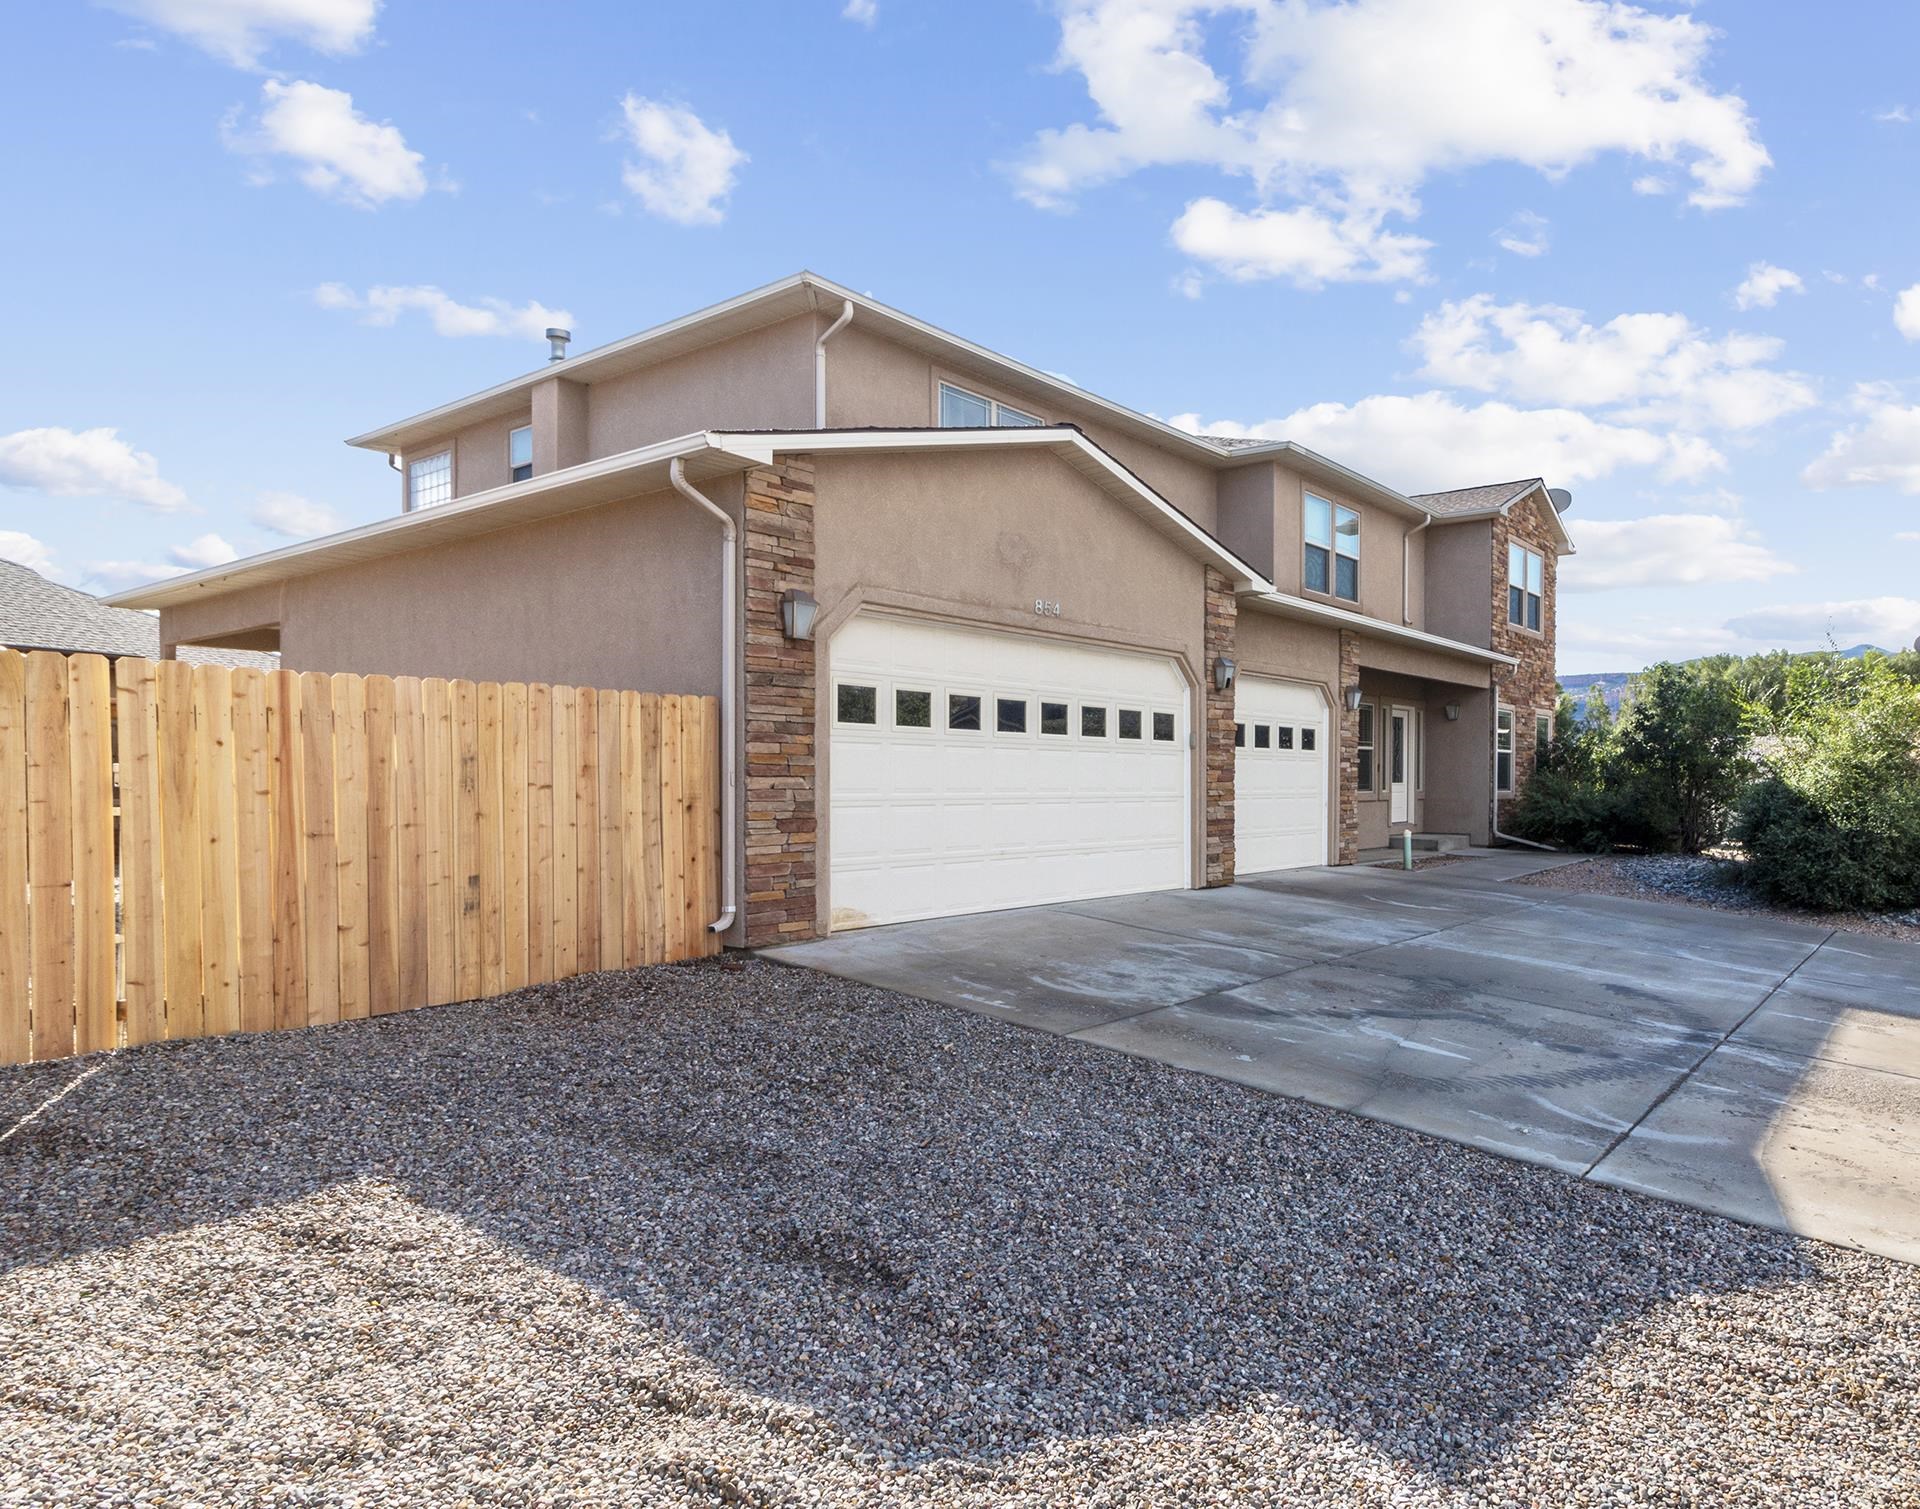 This beautiful custom two-story, 5 bedroom, 3 bath, 3 car garage home in Fruita is located in a quiet, peaceful cul-de-sac in the Santa Ana subdivision. Enjoy gorgeous views of the monument from the massive back yard after you come home to appreciate the high ceiling living space, formal dining, gas fireplace, and spacious main level!  Massive upper level master suite AND main level bedroom with its own entrance!  This unique home includes TWO laundry rooms (one main level and one upper level). This home is sure to check every box you have.  Recent upgrades include new carpeting throughout.  Just minutes from the Colorado National Monument's world class hiking and mountain biking as wells as downtown Fruita's shops and restaurants!  Additional amenities include granite countertops, covered patio area off of main-level bedroom, 5-piece master bath and much more! Call today to schedule a showing.